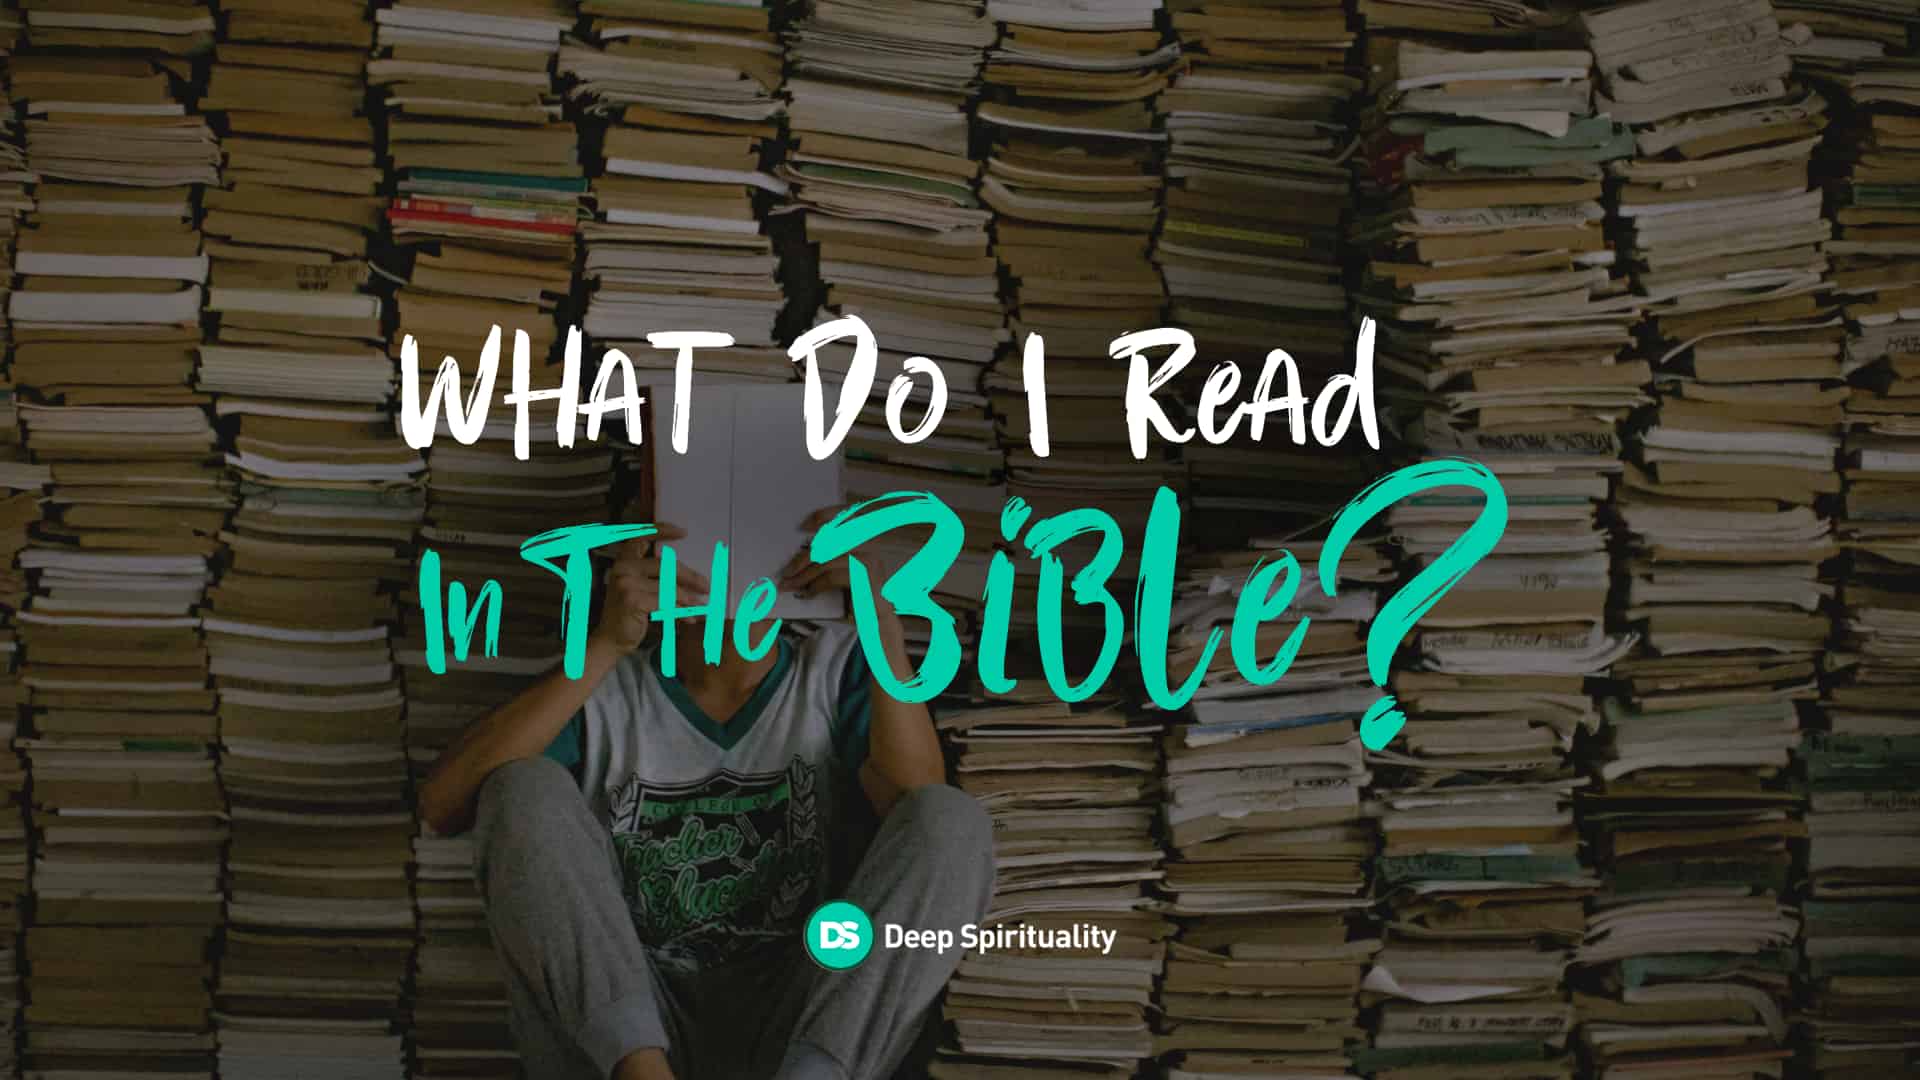 Help! How Do I Know What to Read in the Bible? 5